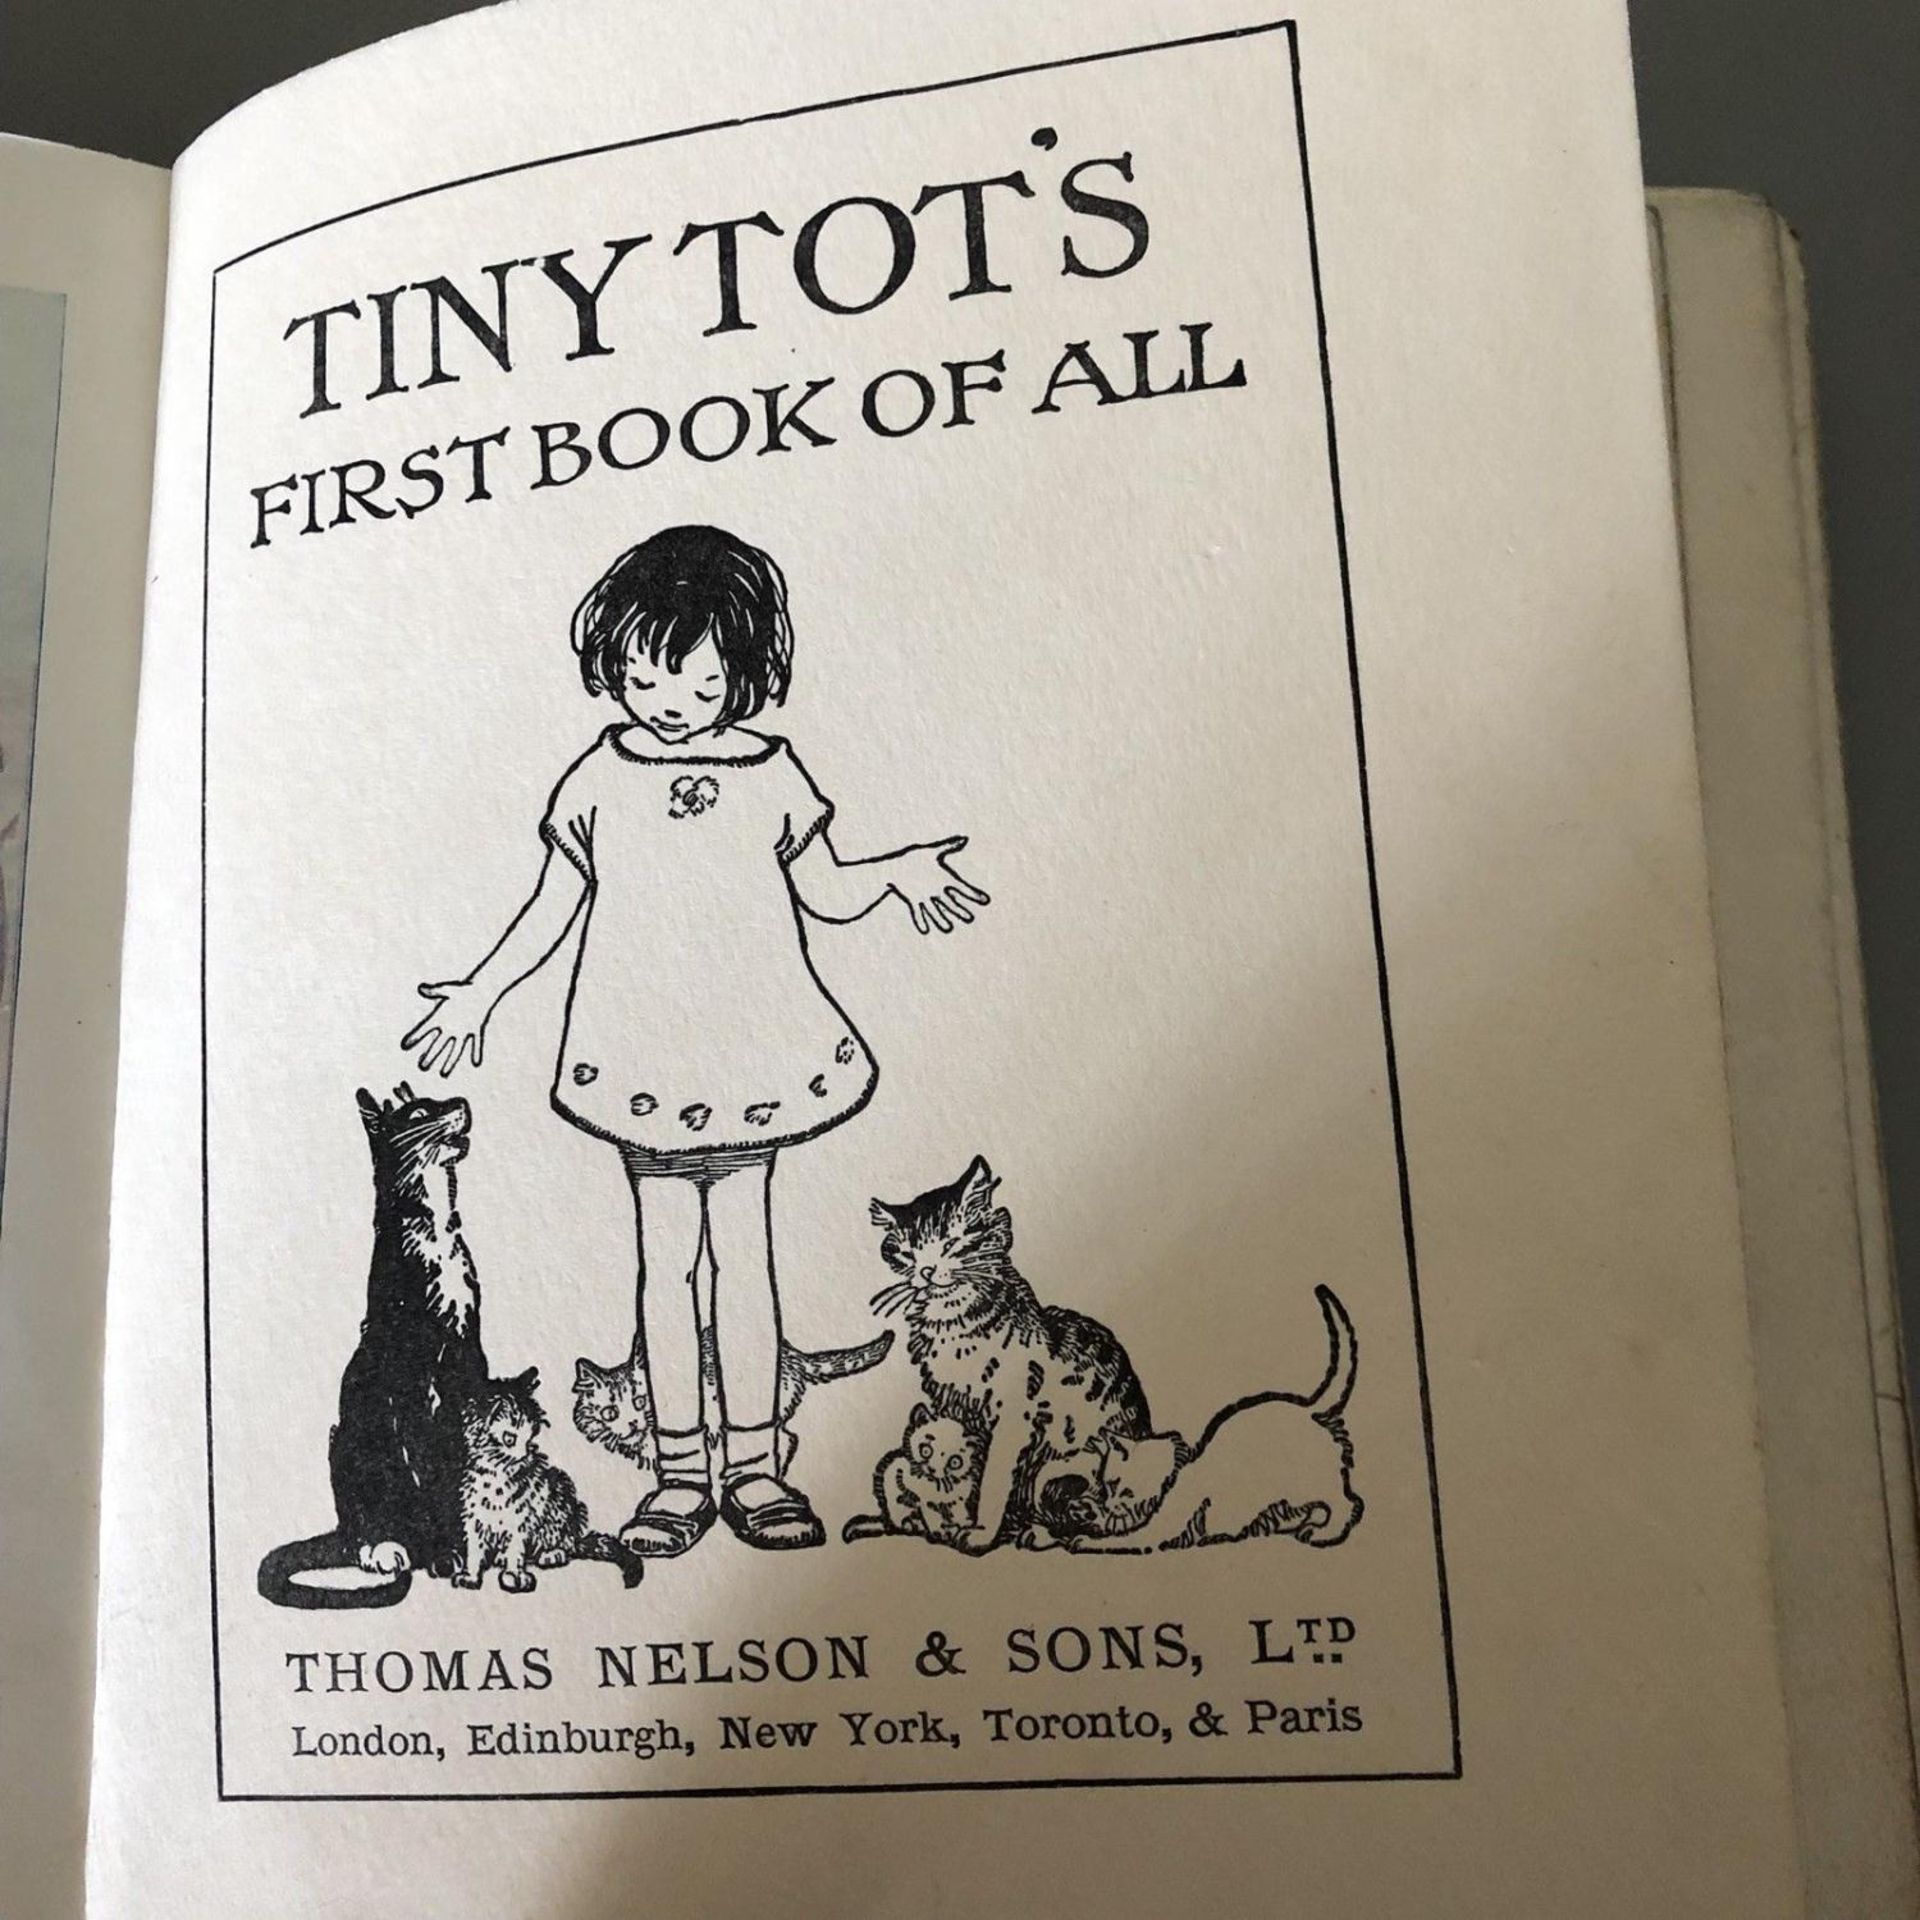 Vintage Children's Book "Tiny Tots First Book of All" c.1930 Alphabet Stories - Image 3 of 7